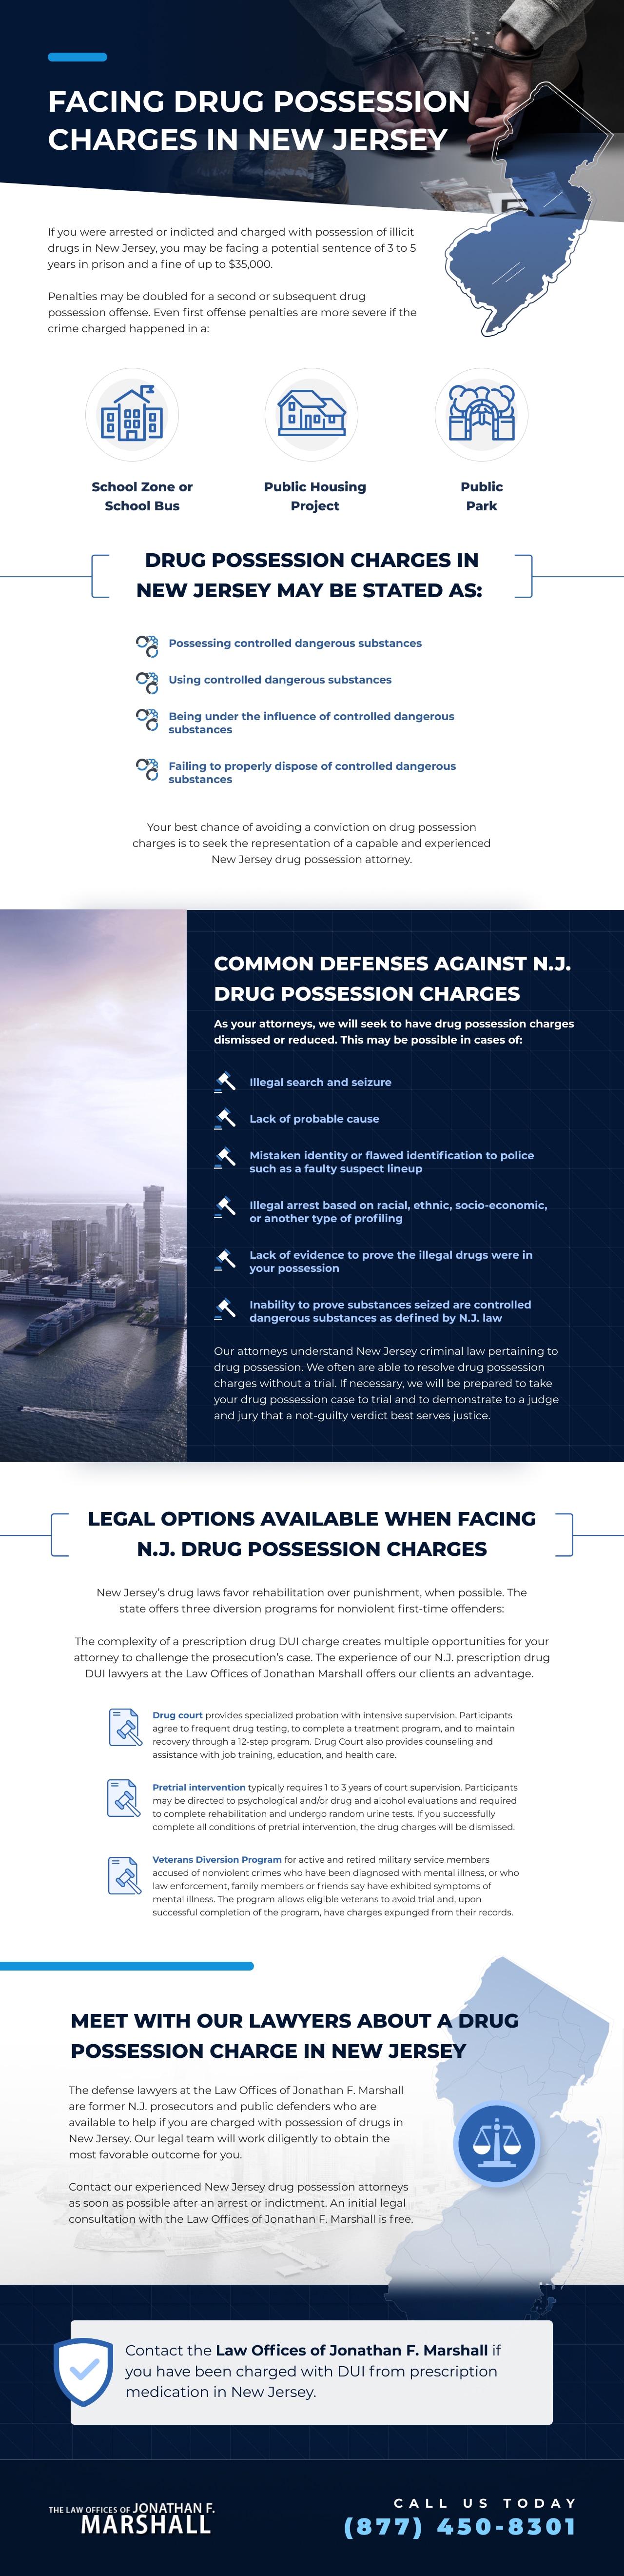 Facing Drug Possession Charges in New Jersey